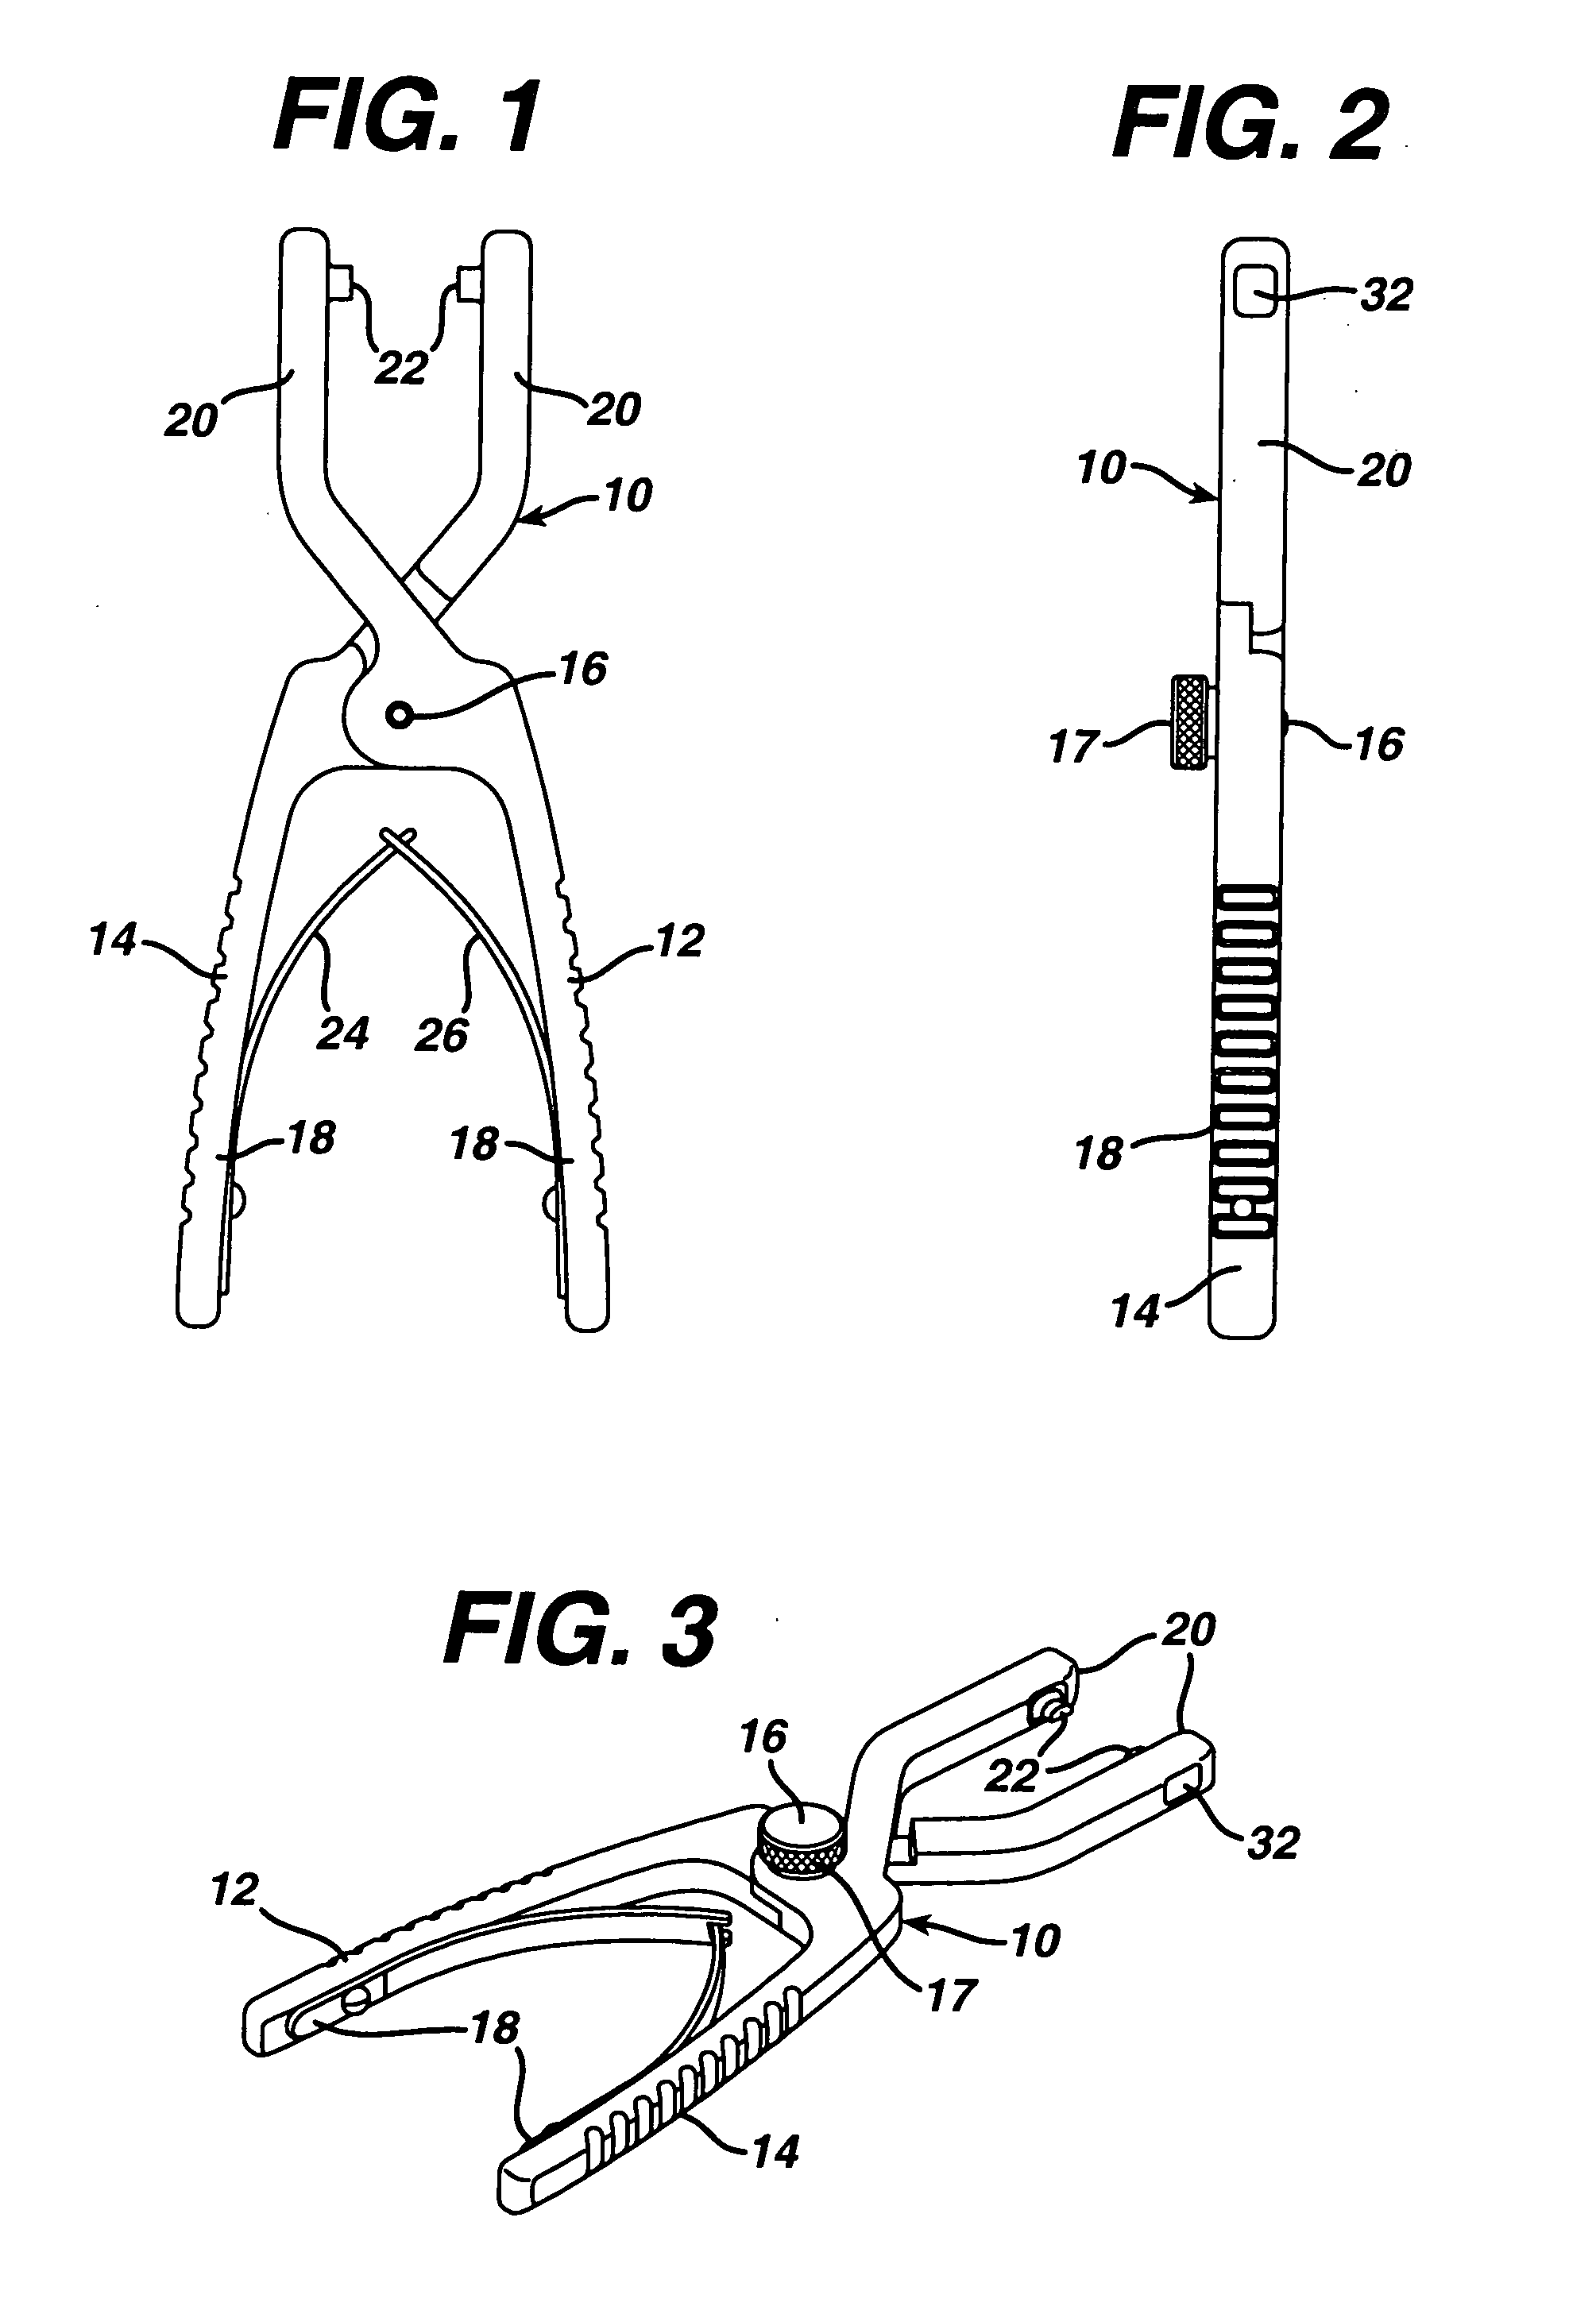 Device and method for separation of modular orthopaedic elements